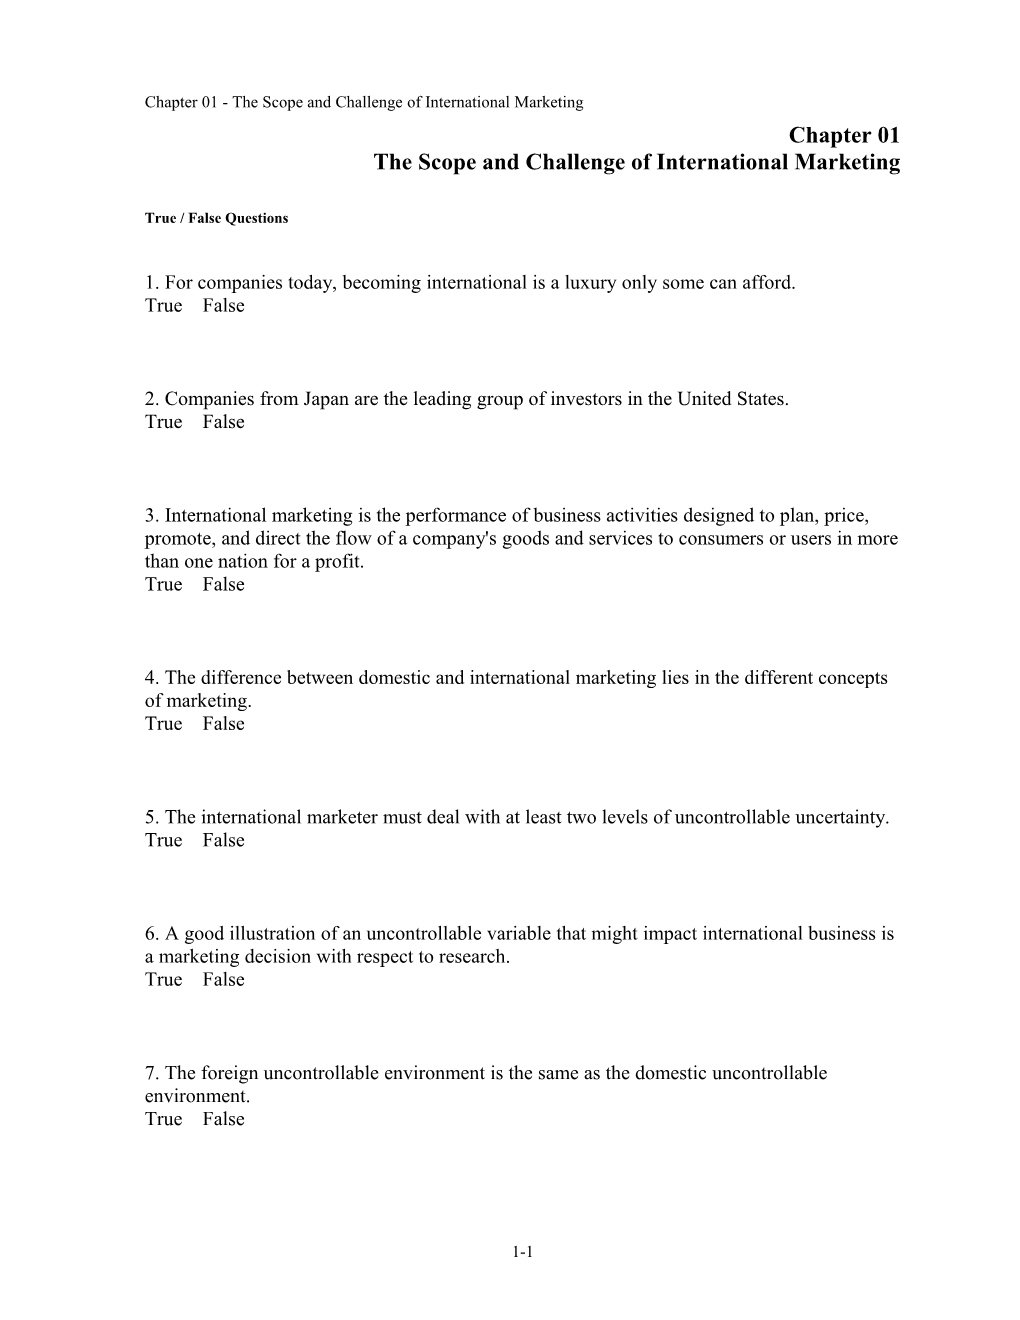 Chapter 01 the Scope and Challenge of International Marketing s1